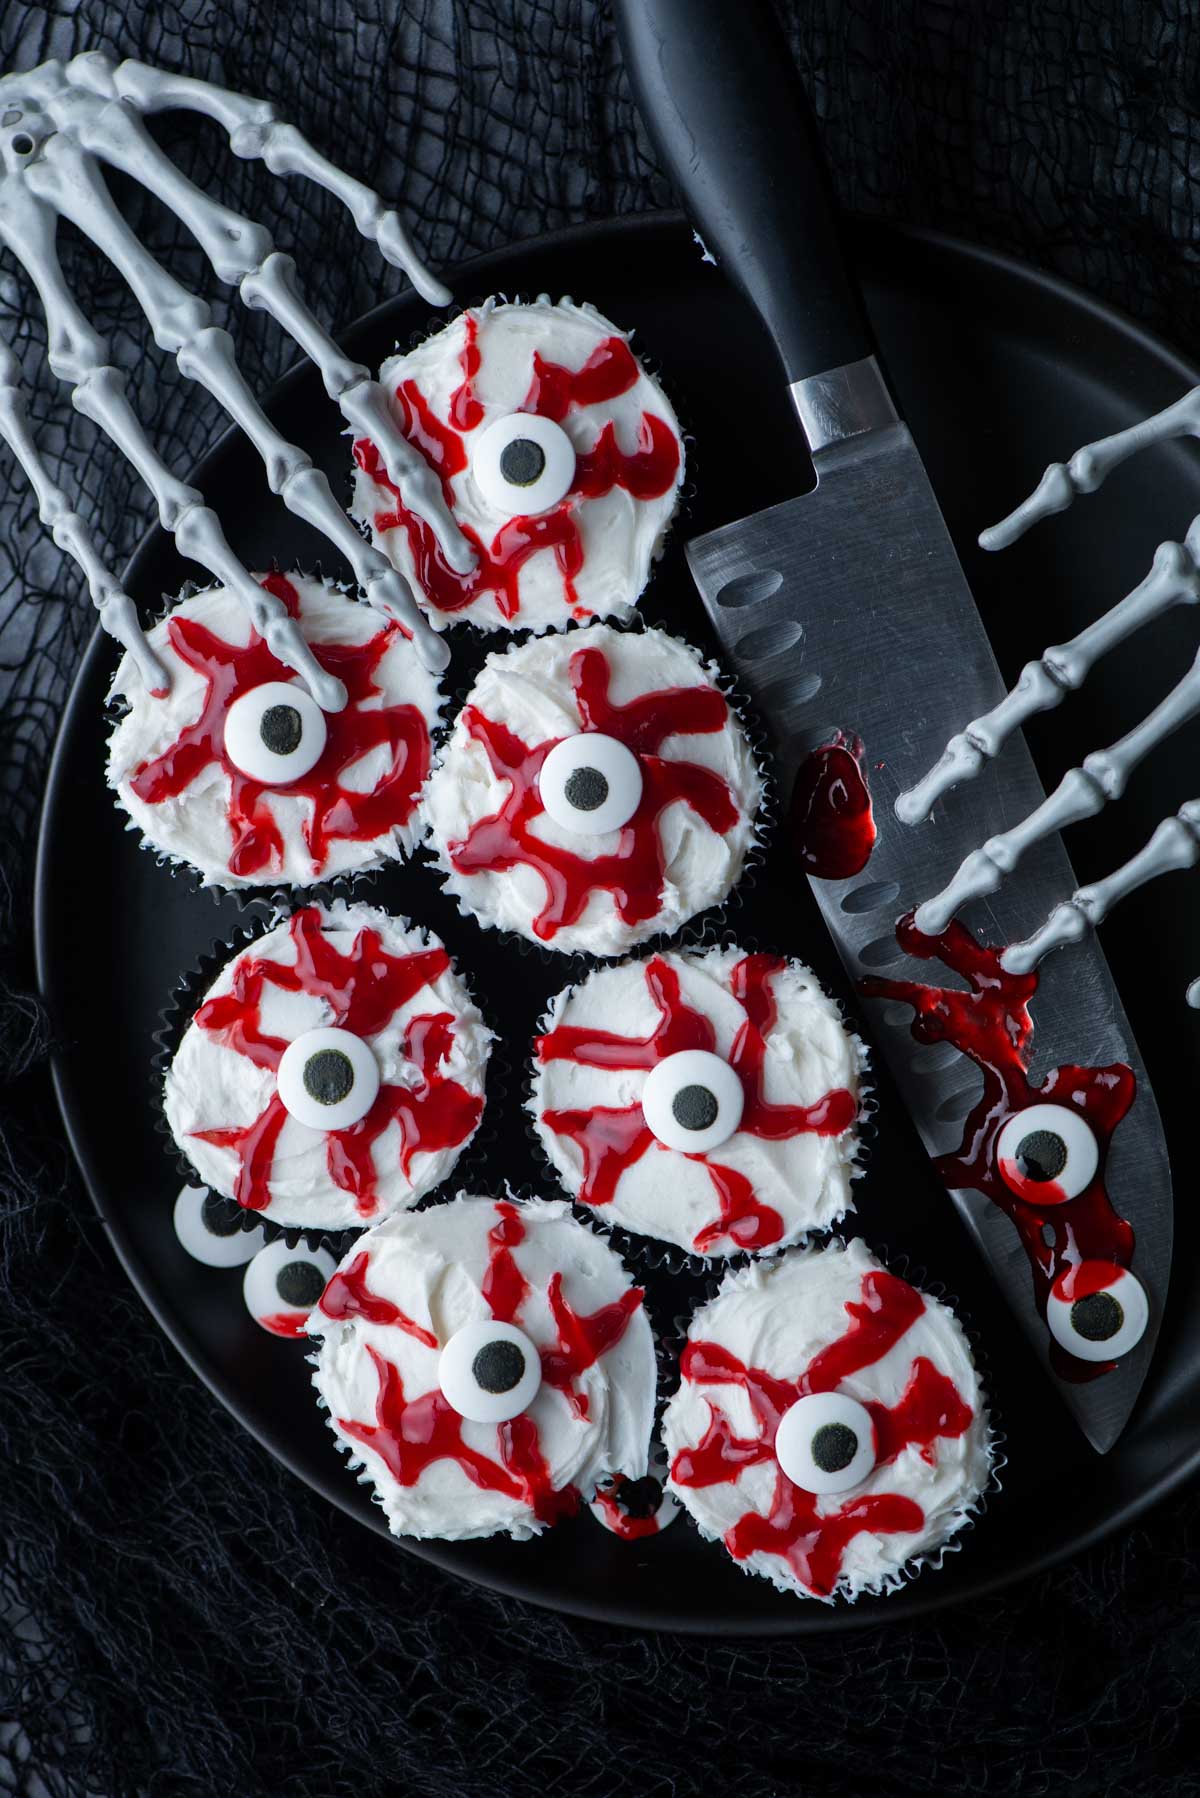 eyeball cupcakes on a black plate with a large knife covered in bloody jam, more candy eyeballs and skeleton hands